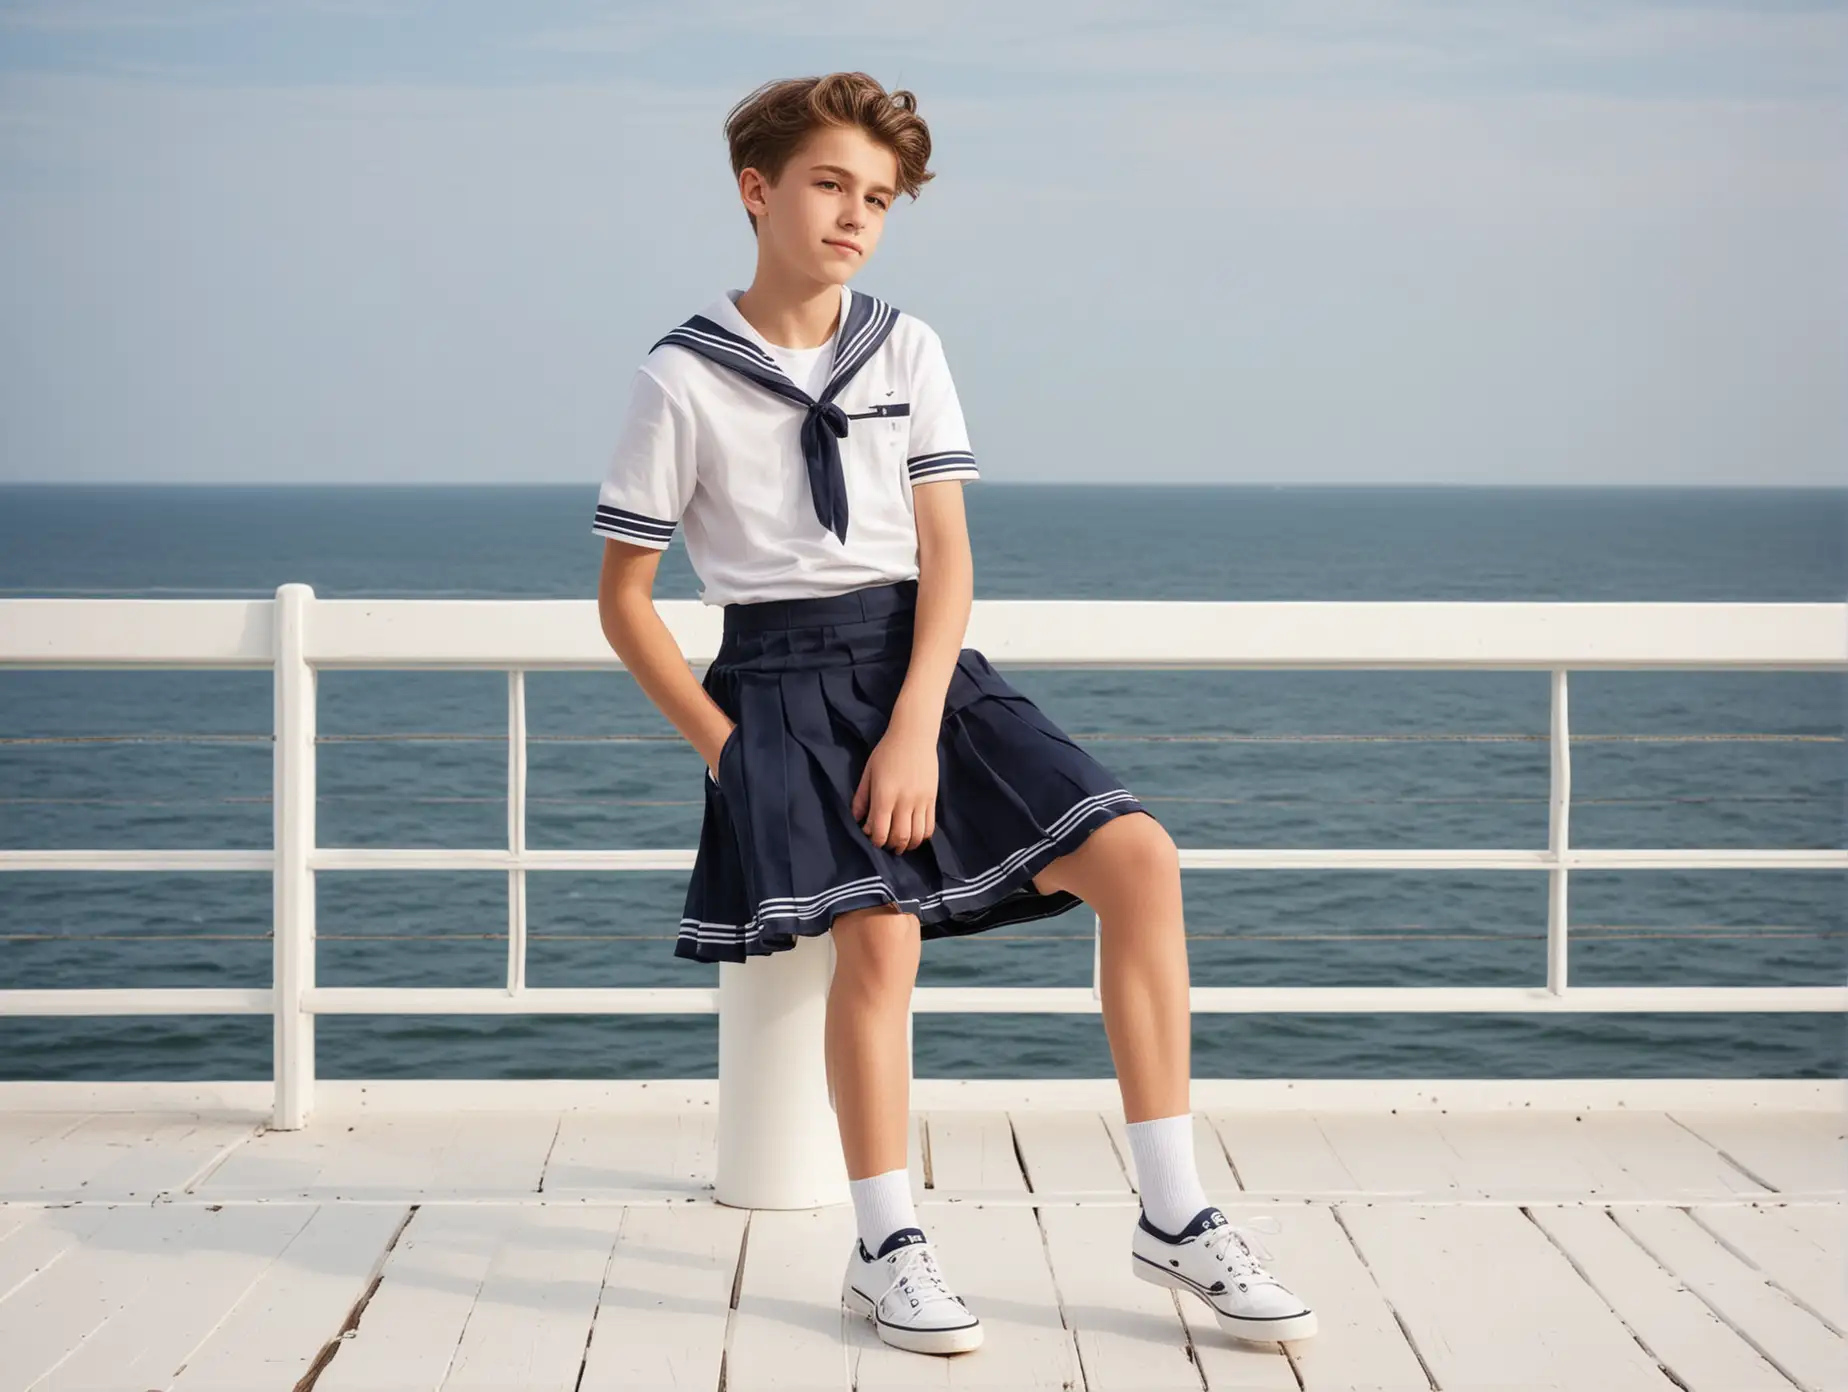 thin 15 year old boy in sailor dress with skirt.  white deck shoes